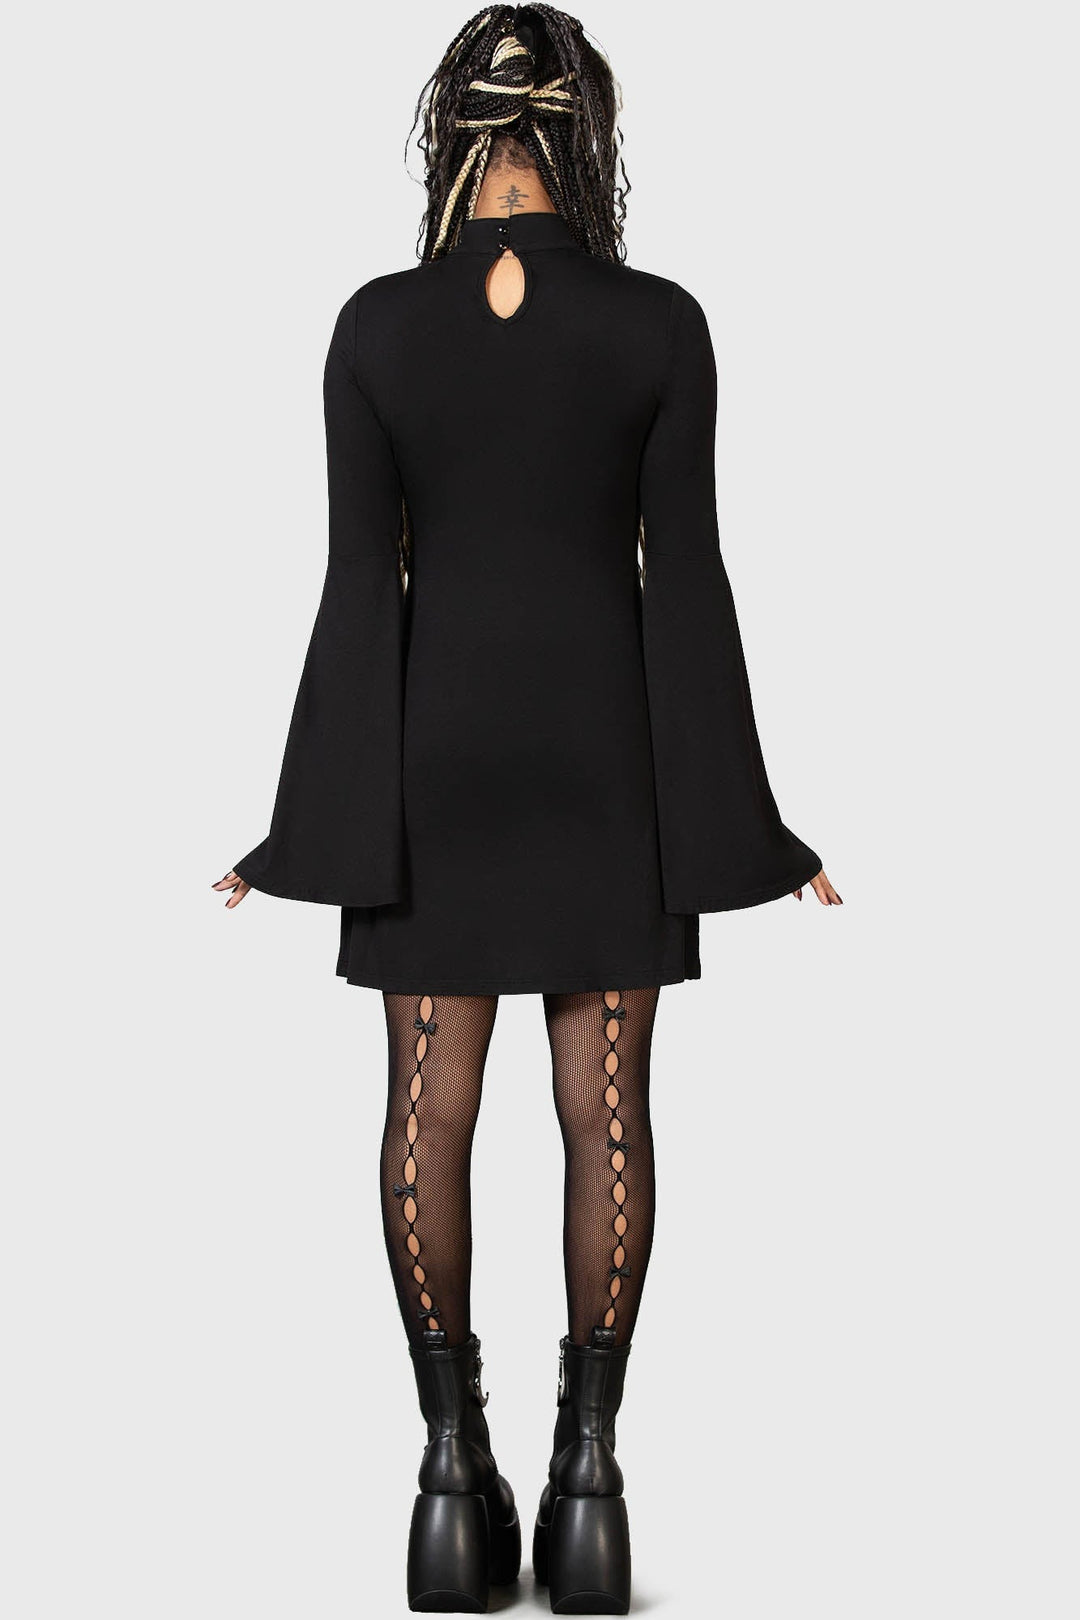 womens witchy dress